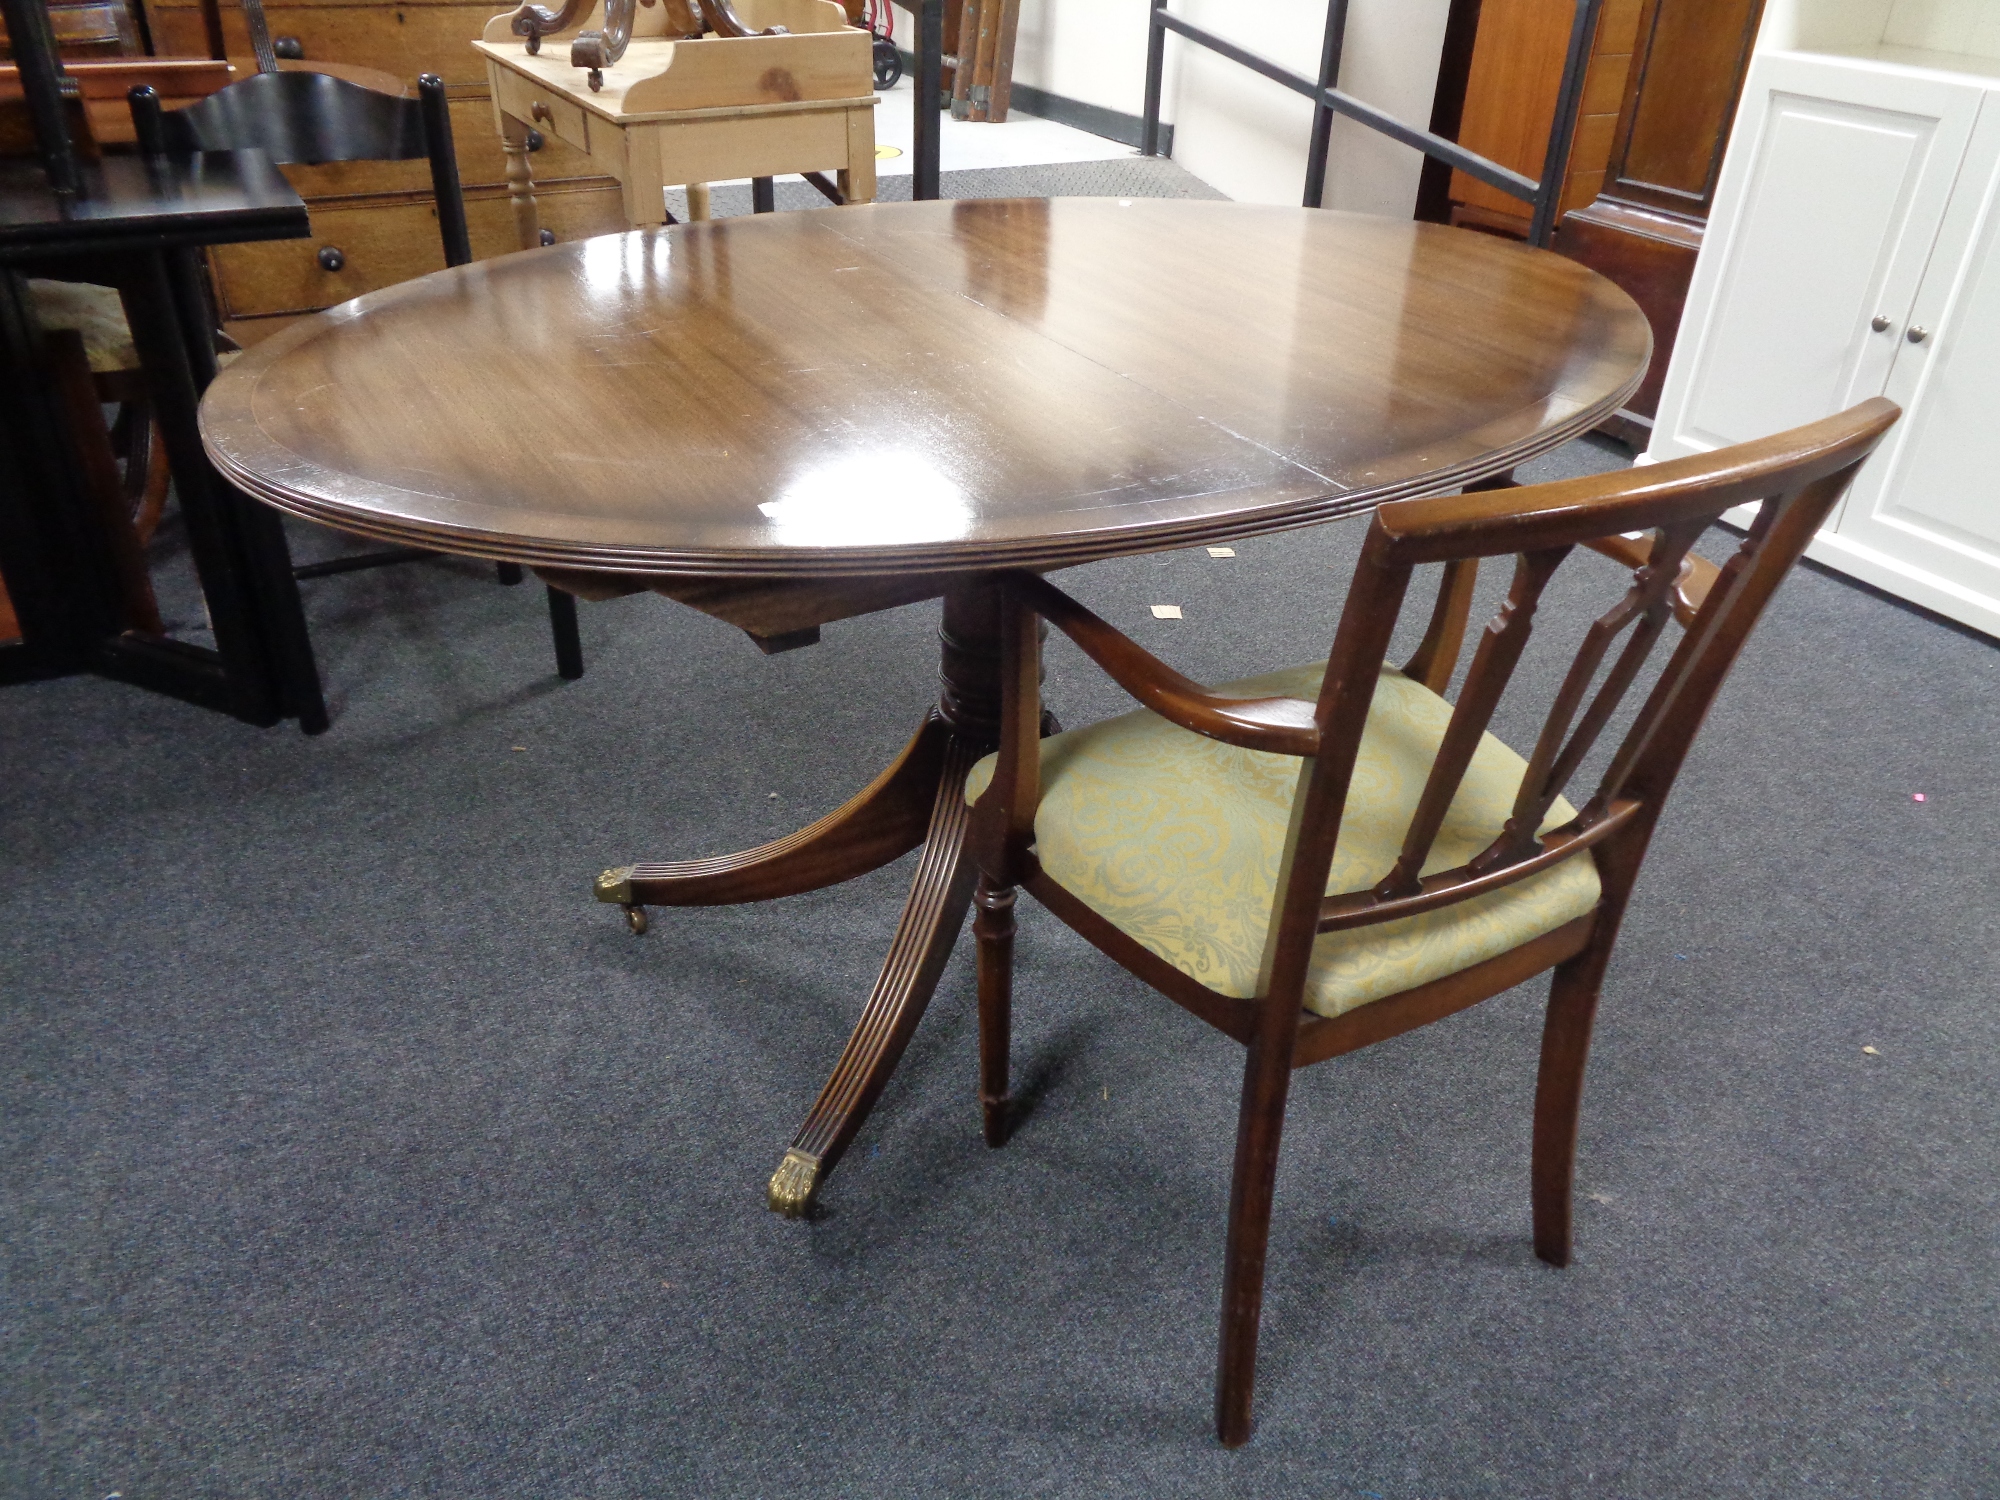 An oval inlaid mahogany pedestal dining table with leaf and a mahogany armchair